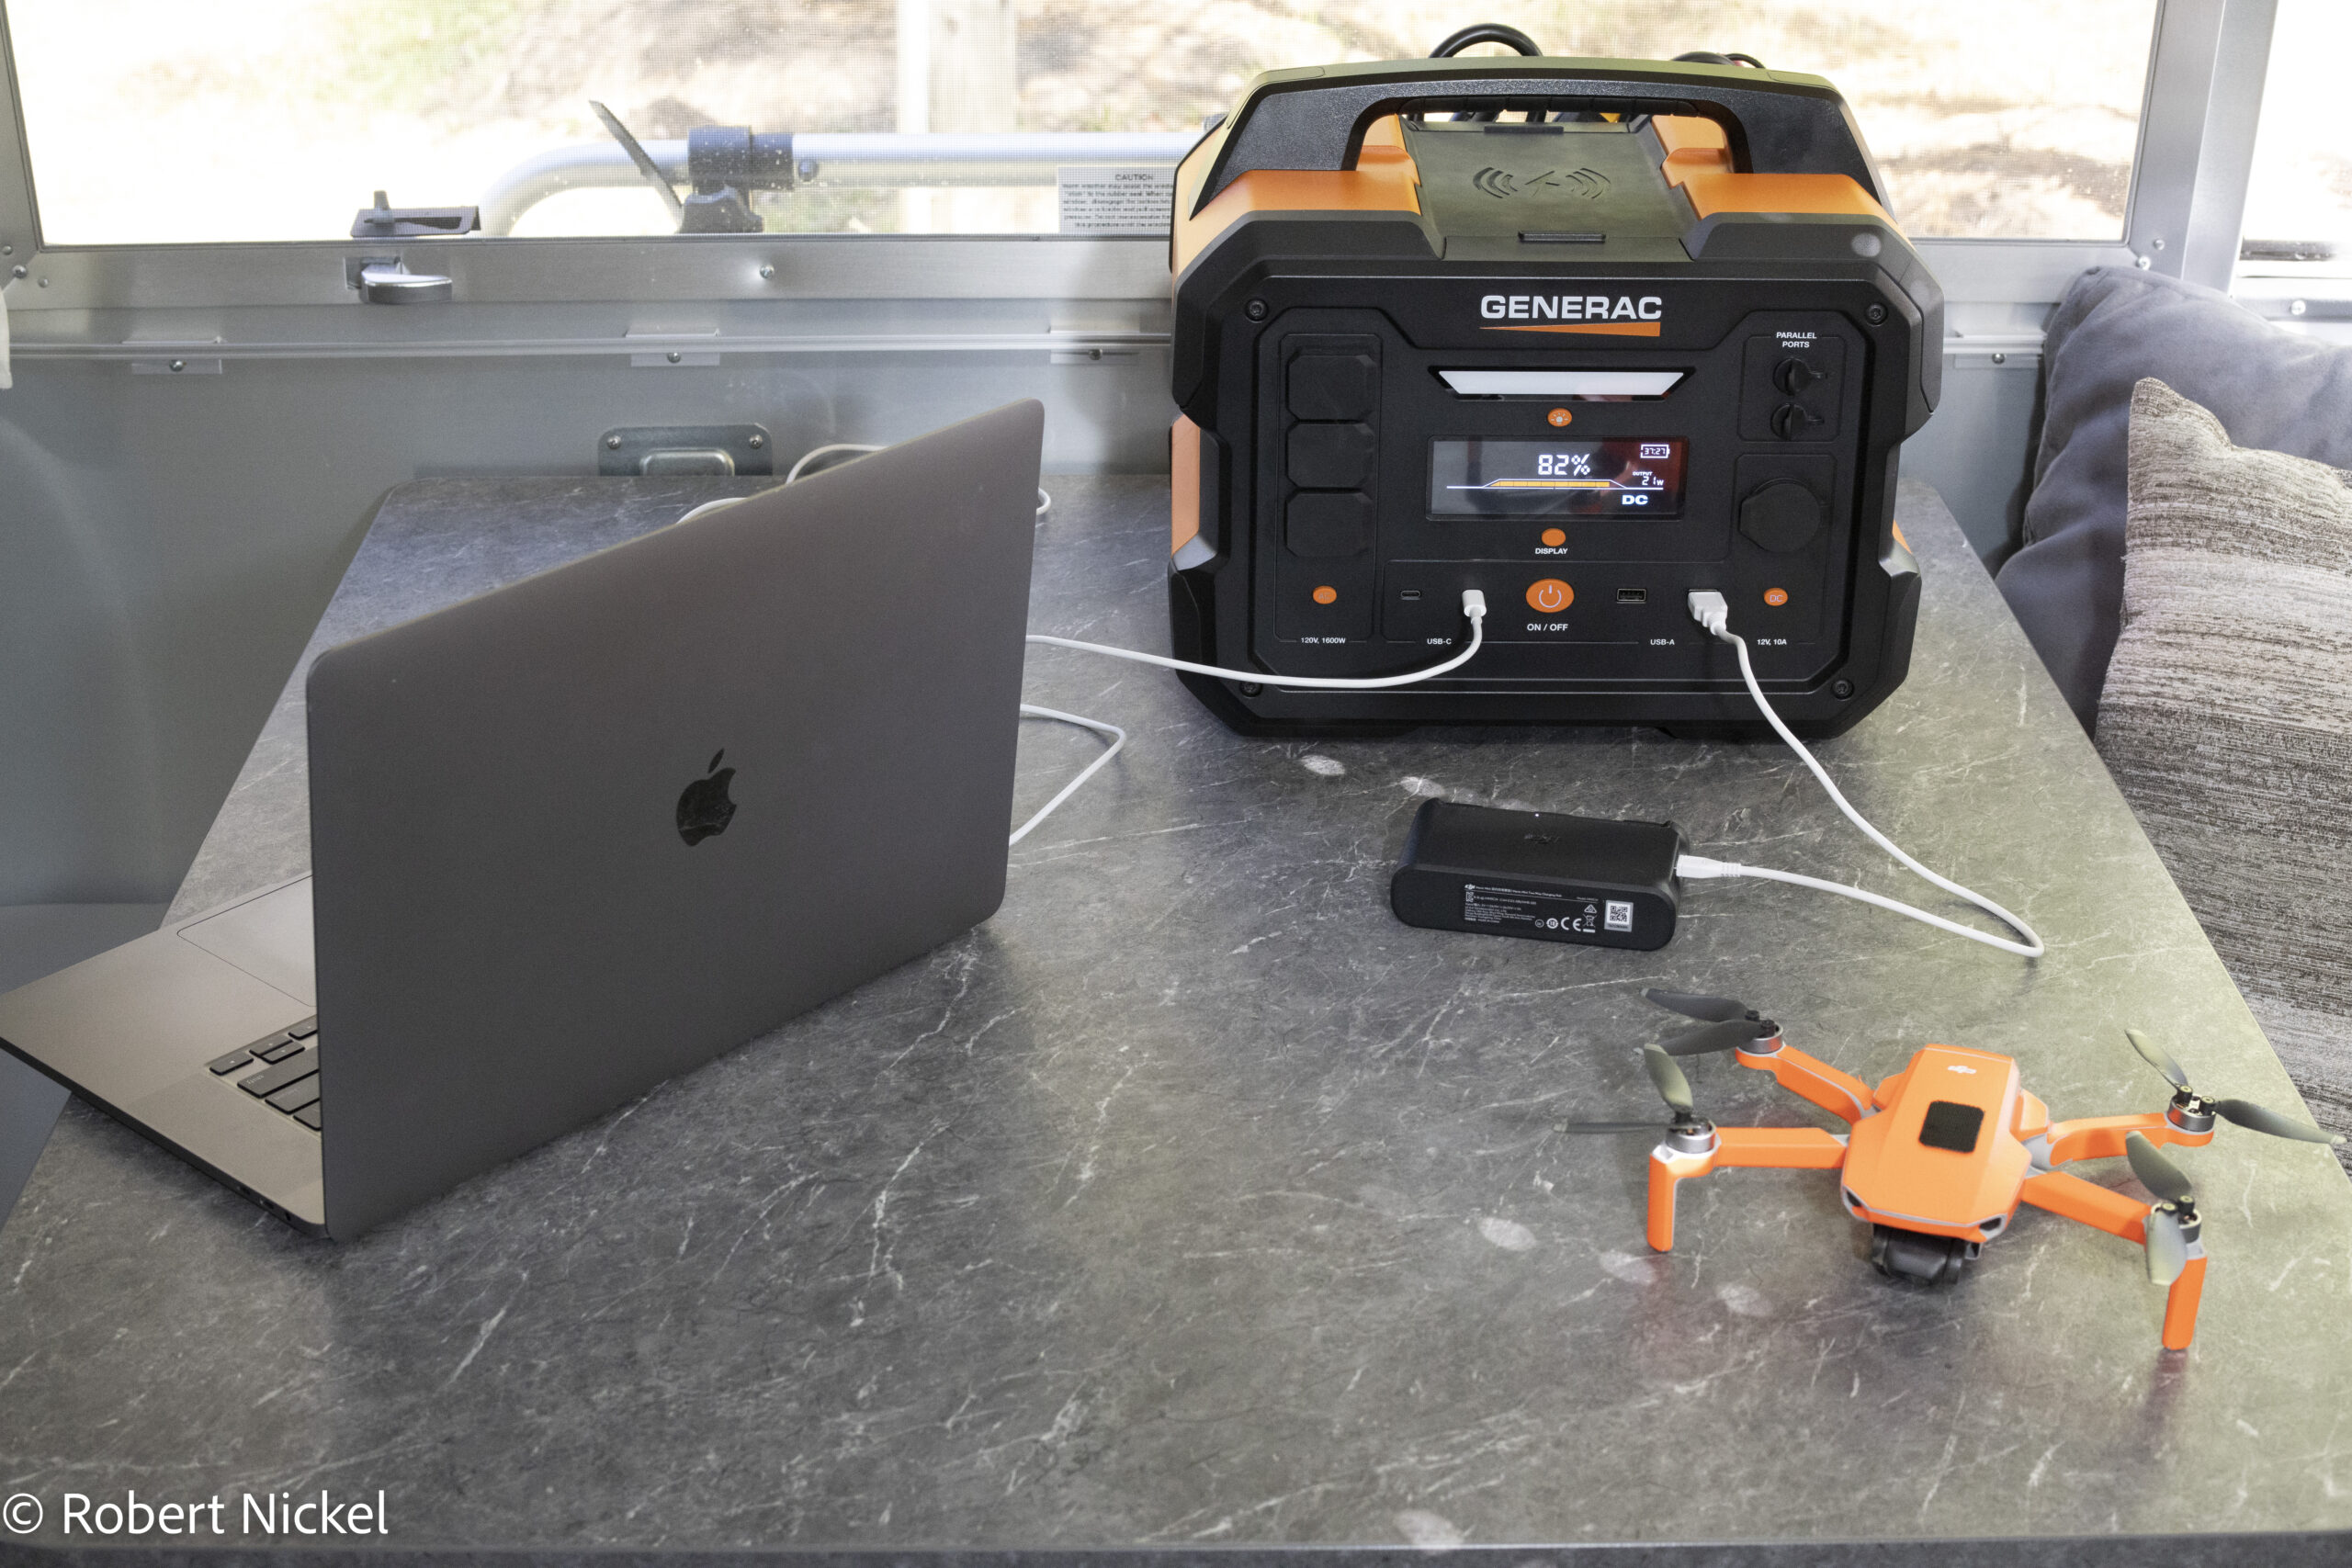 GENERAC GB1000 portable power station with laptop and drone control plugged in.